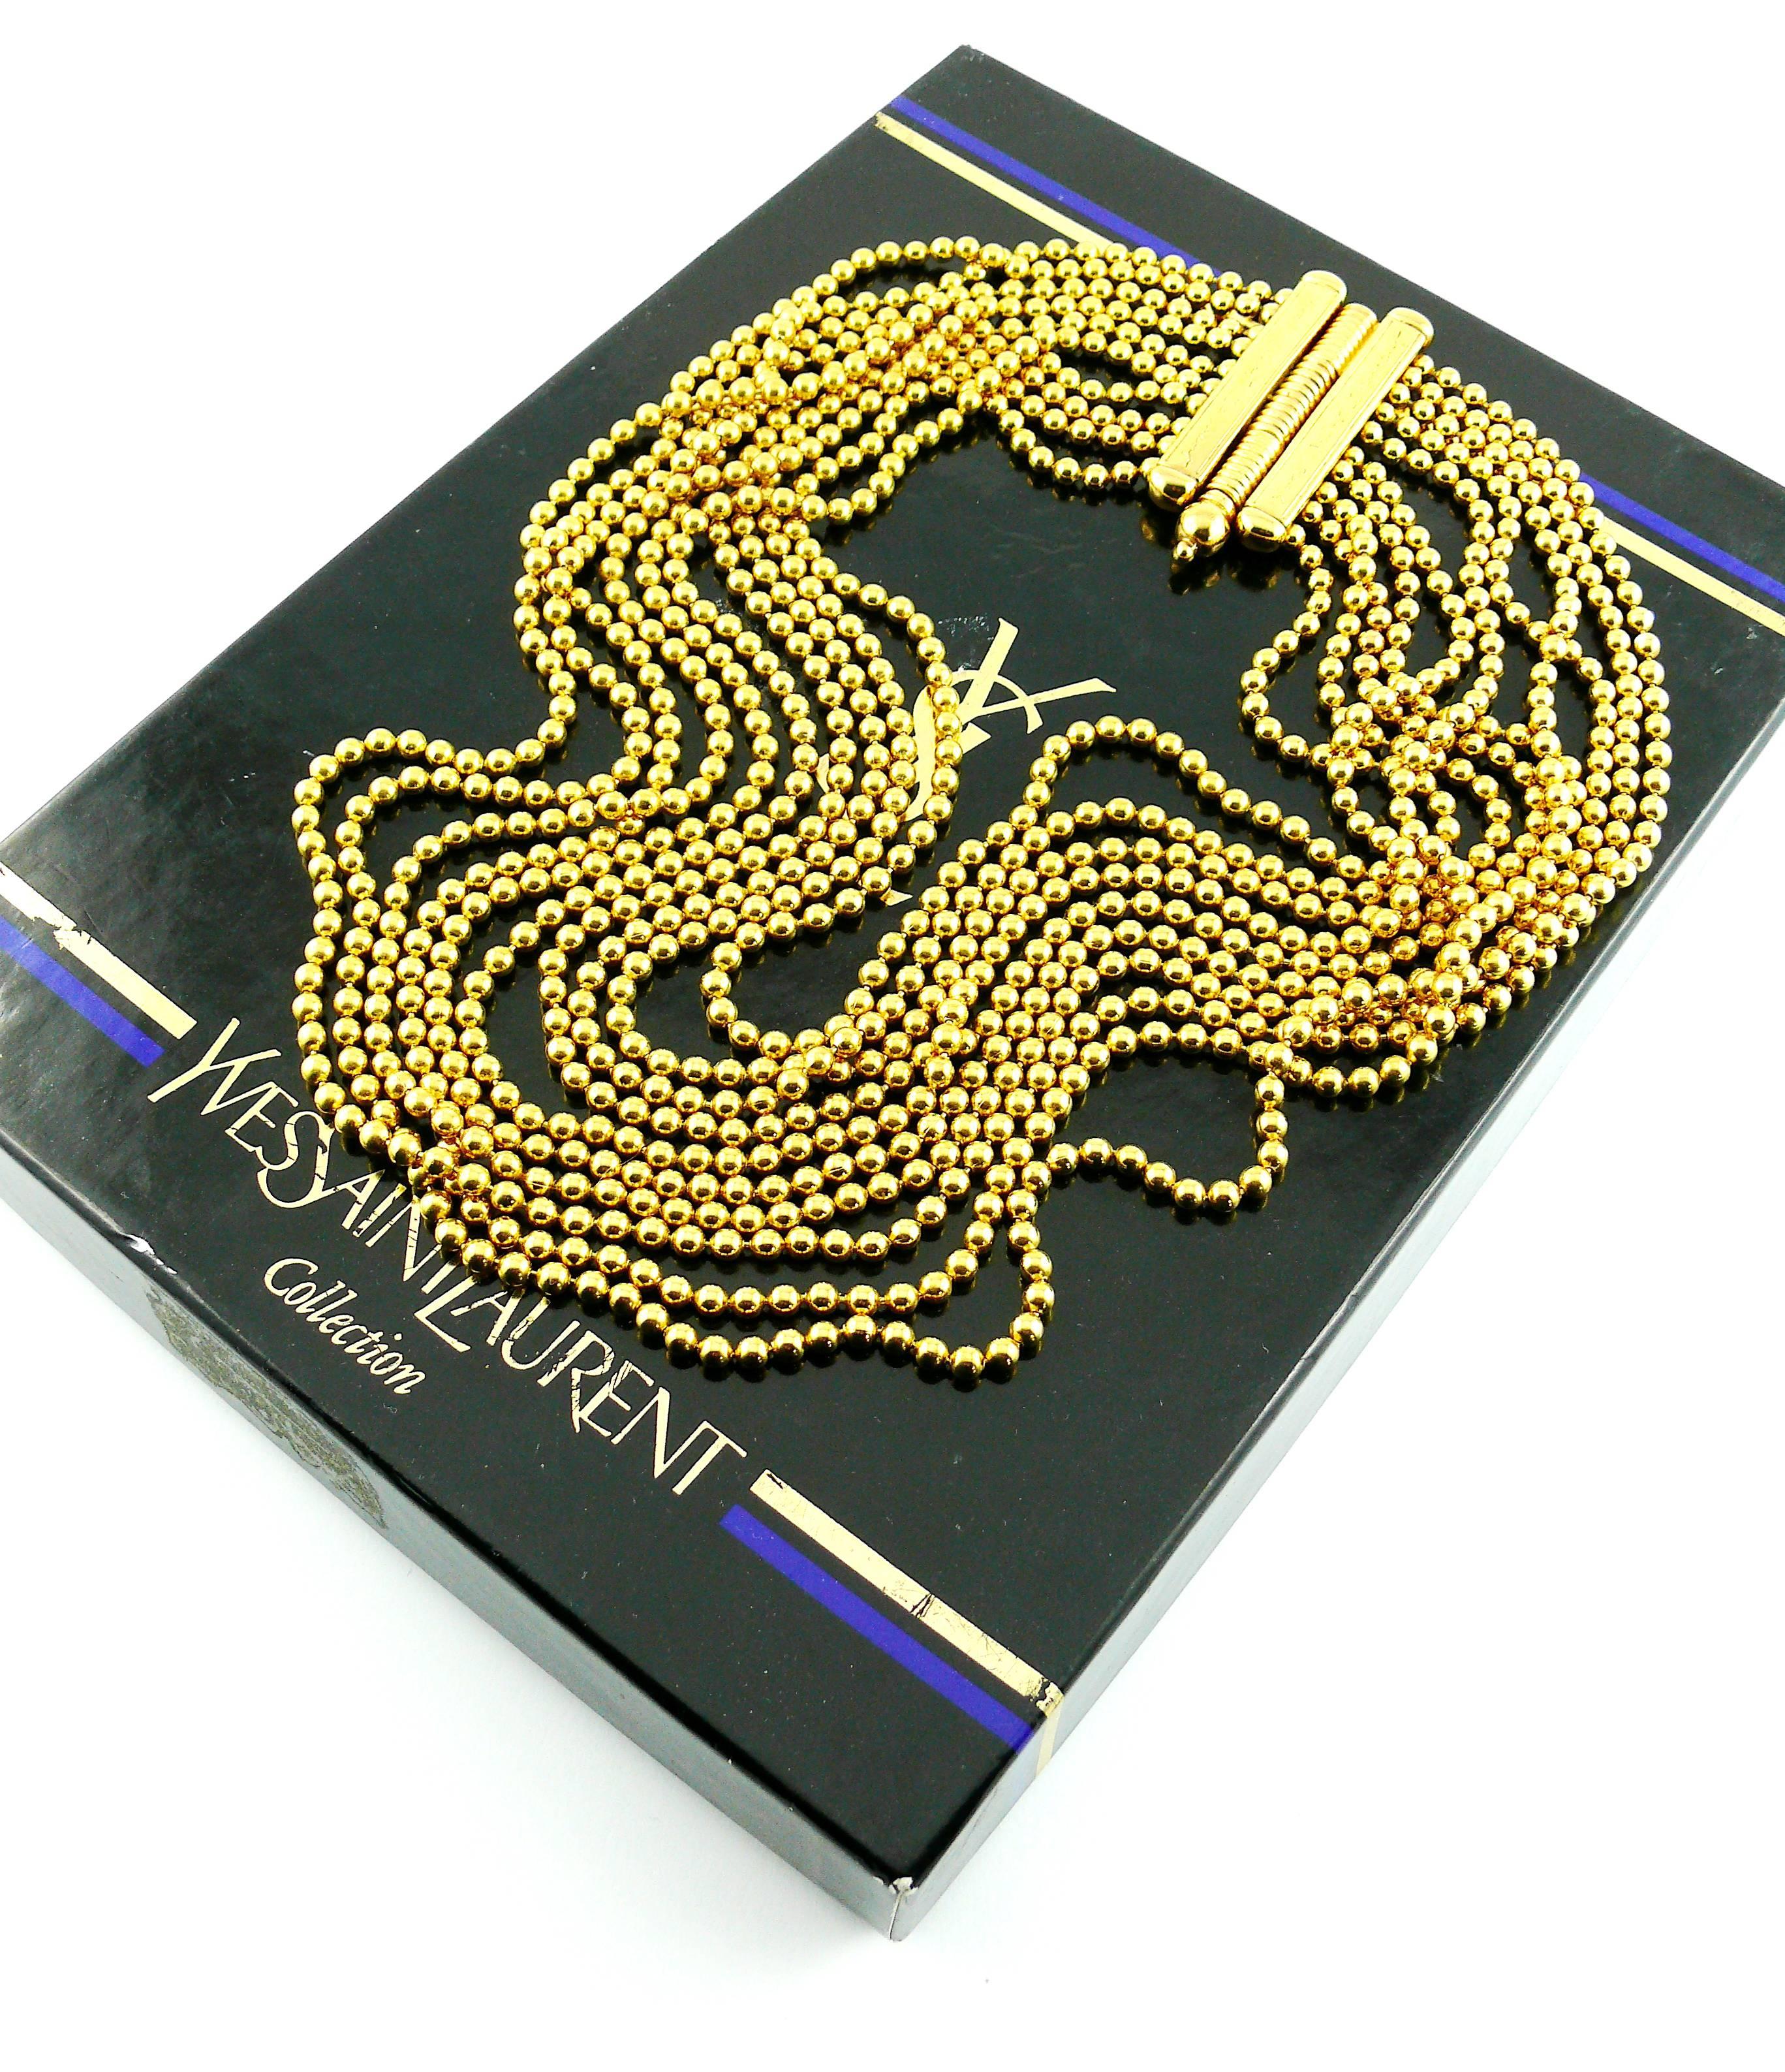 YVES SAINT LAURENT vintage gold toned multi-strand Massaï style necklace.

Secure pin clasp.

Embossed YVES SAINT LAURENT on the clasp.

Indicative measurements : length approx. 44 cm (17.32 inches) / maximum drop (worn) approx. 8 cm (3.15